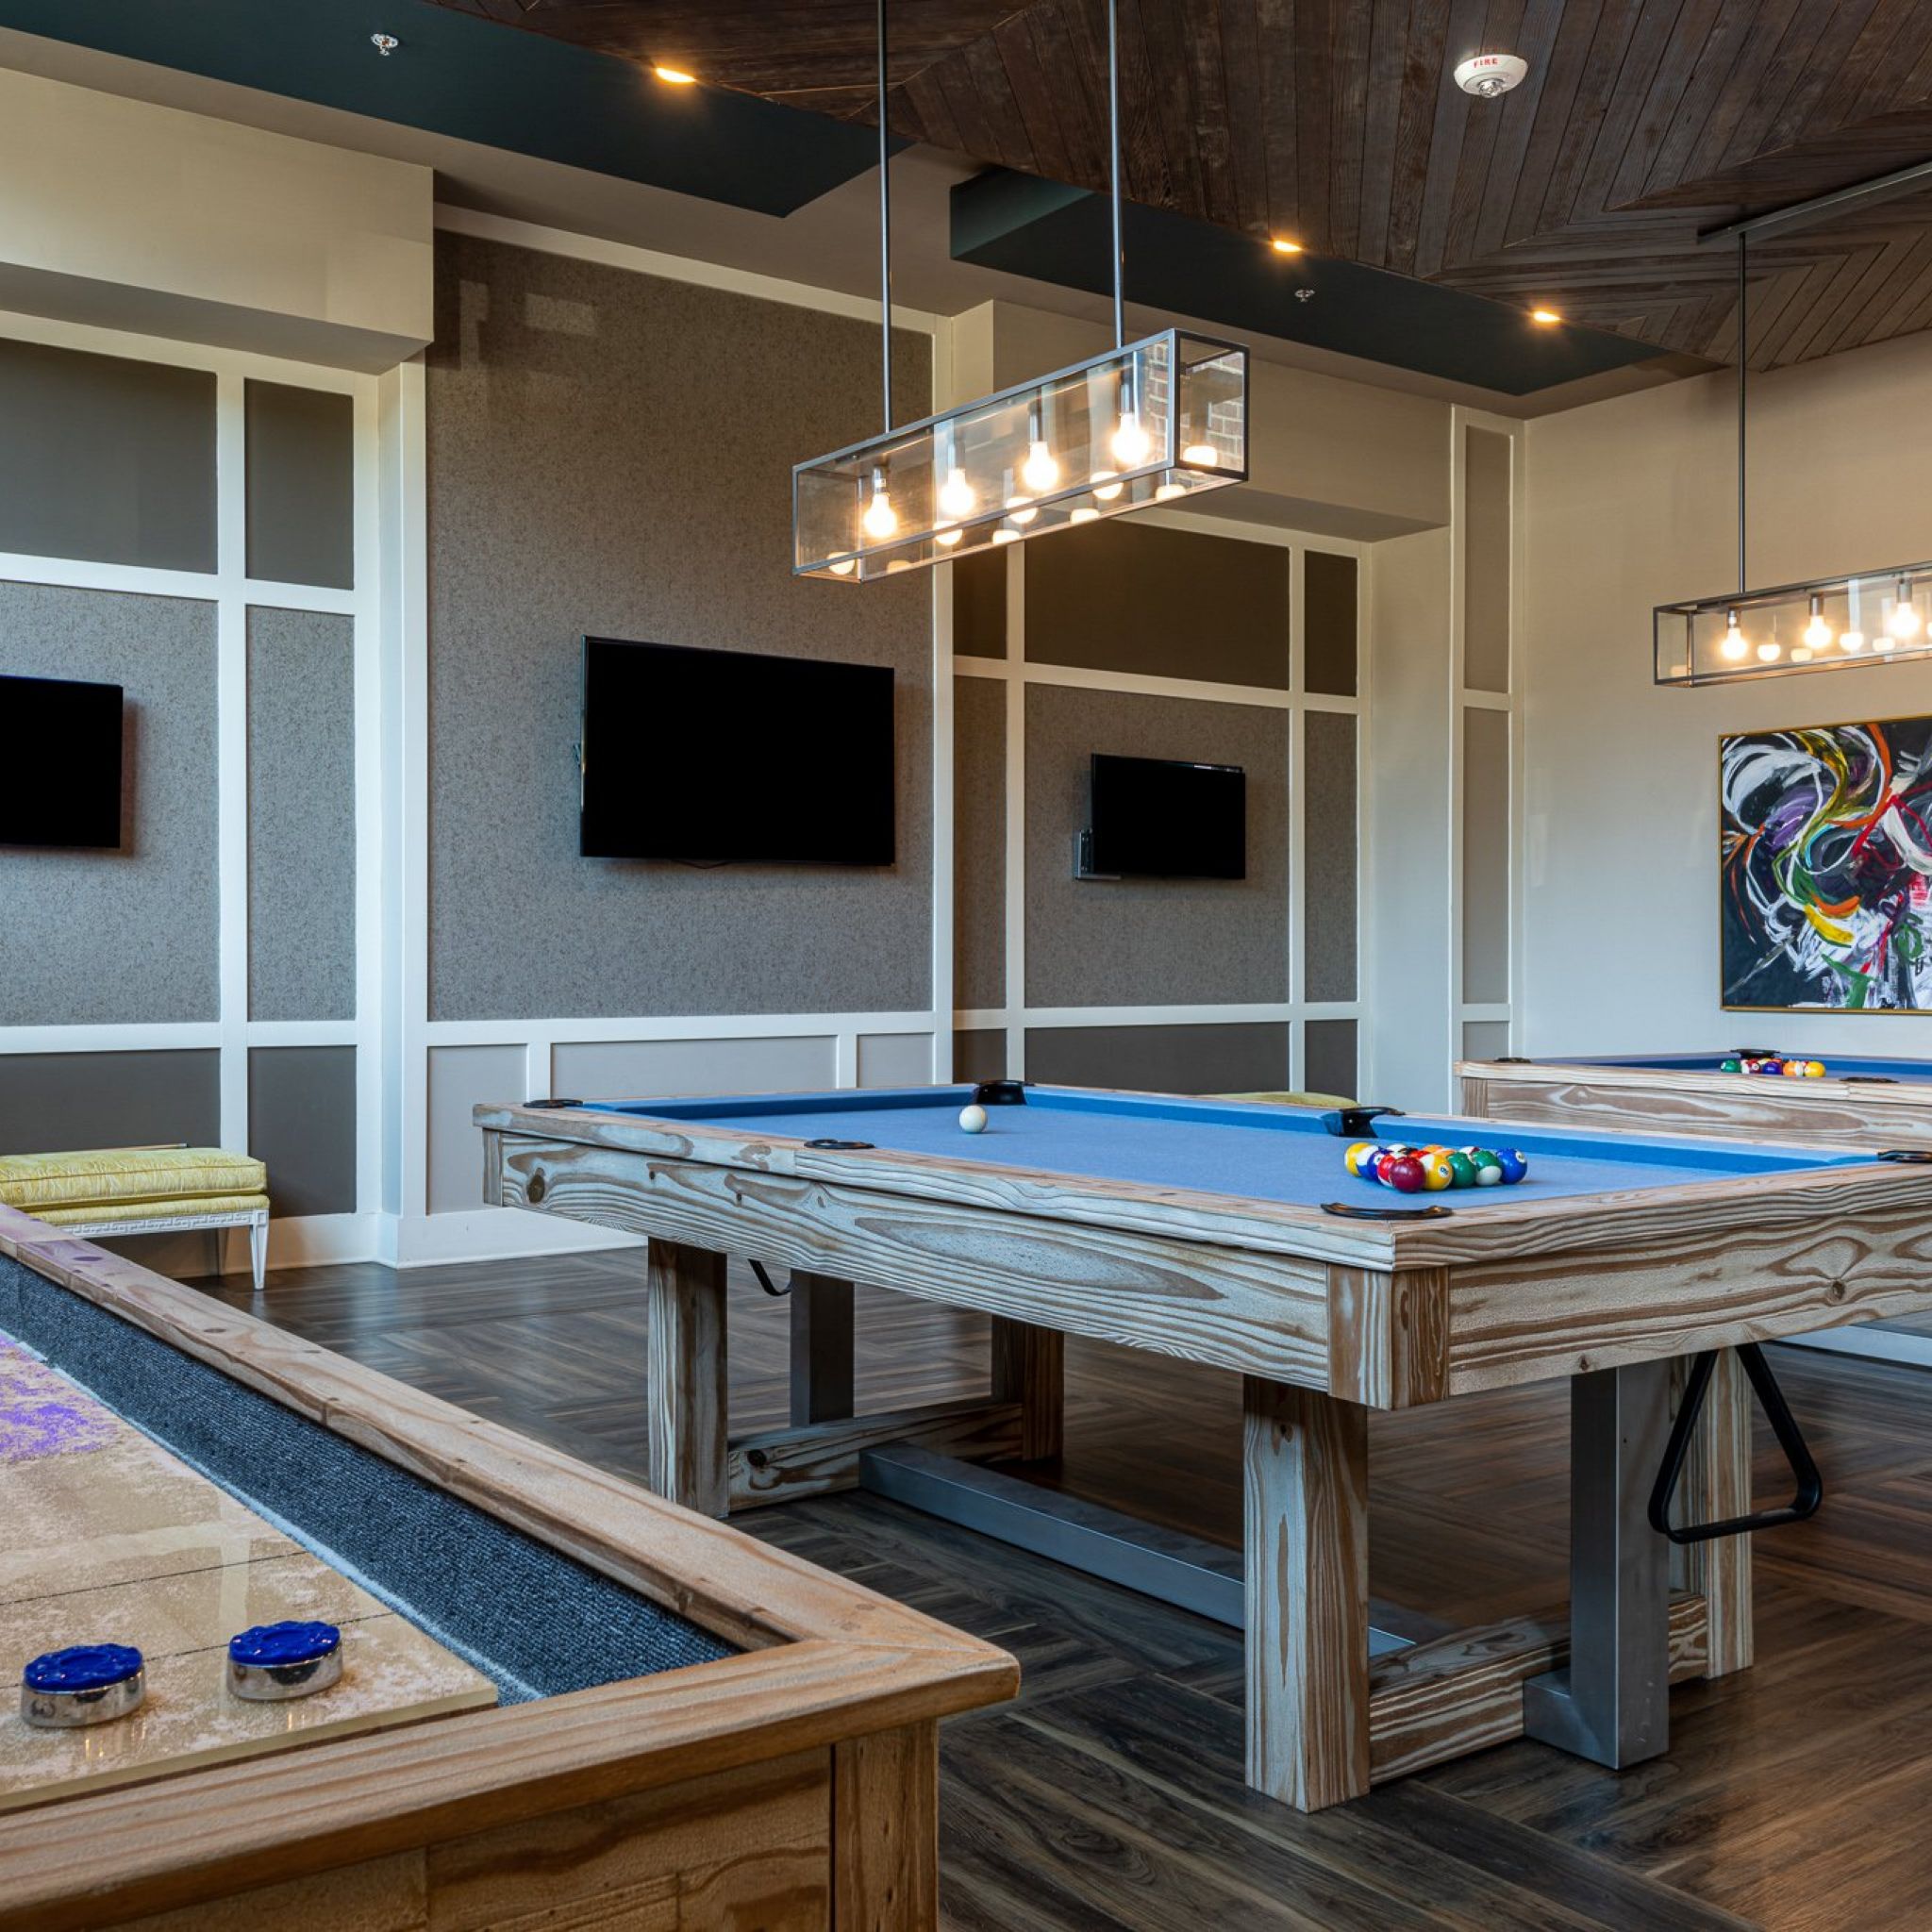 Billiards table and shuffleboard table inside game room amenity at Carraway Village Apartments in Chapel Hill, NC